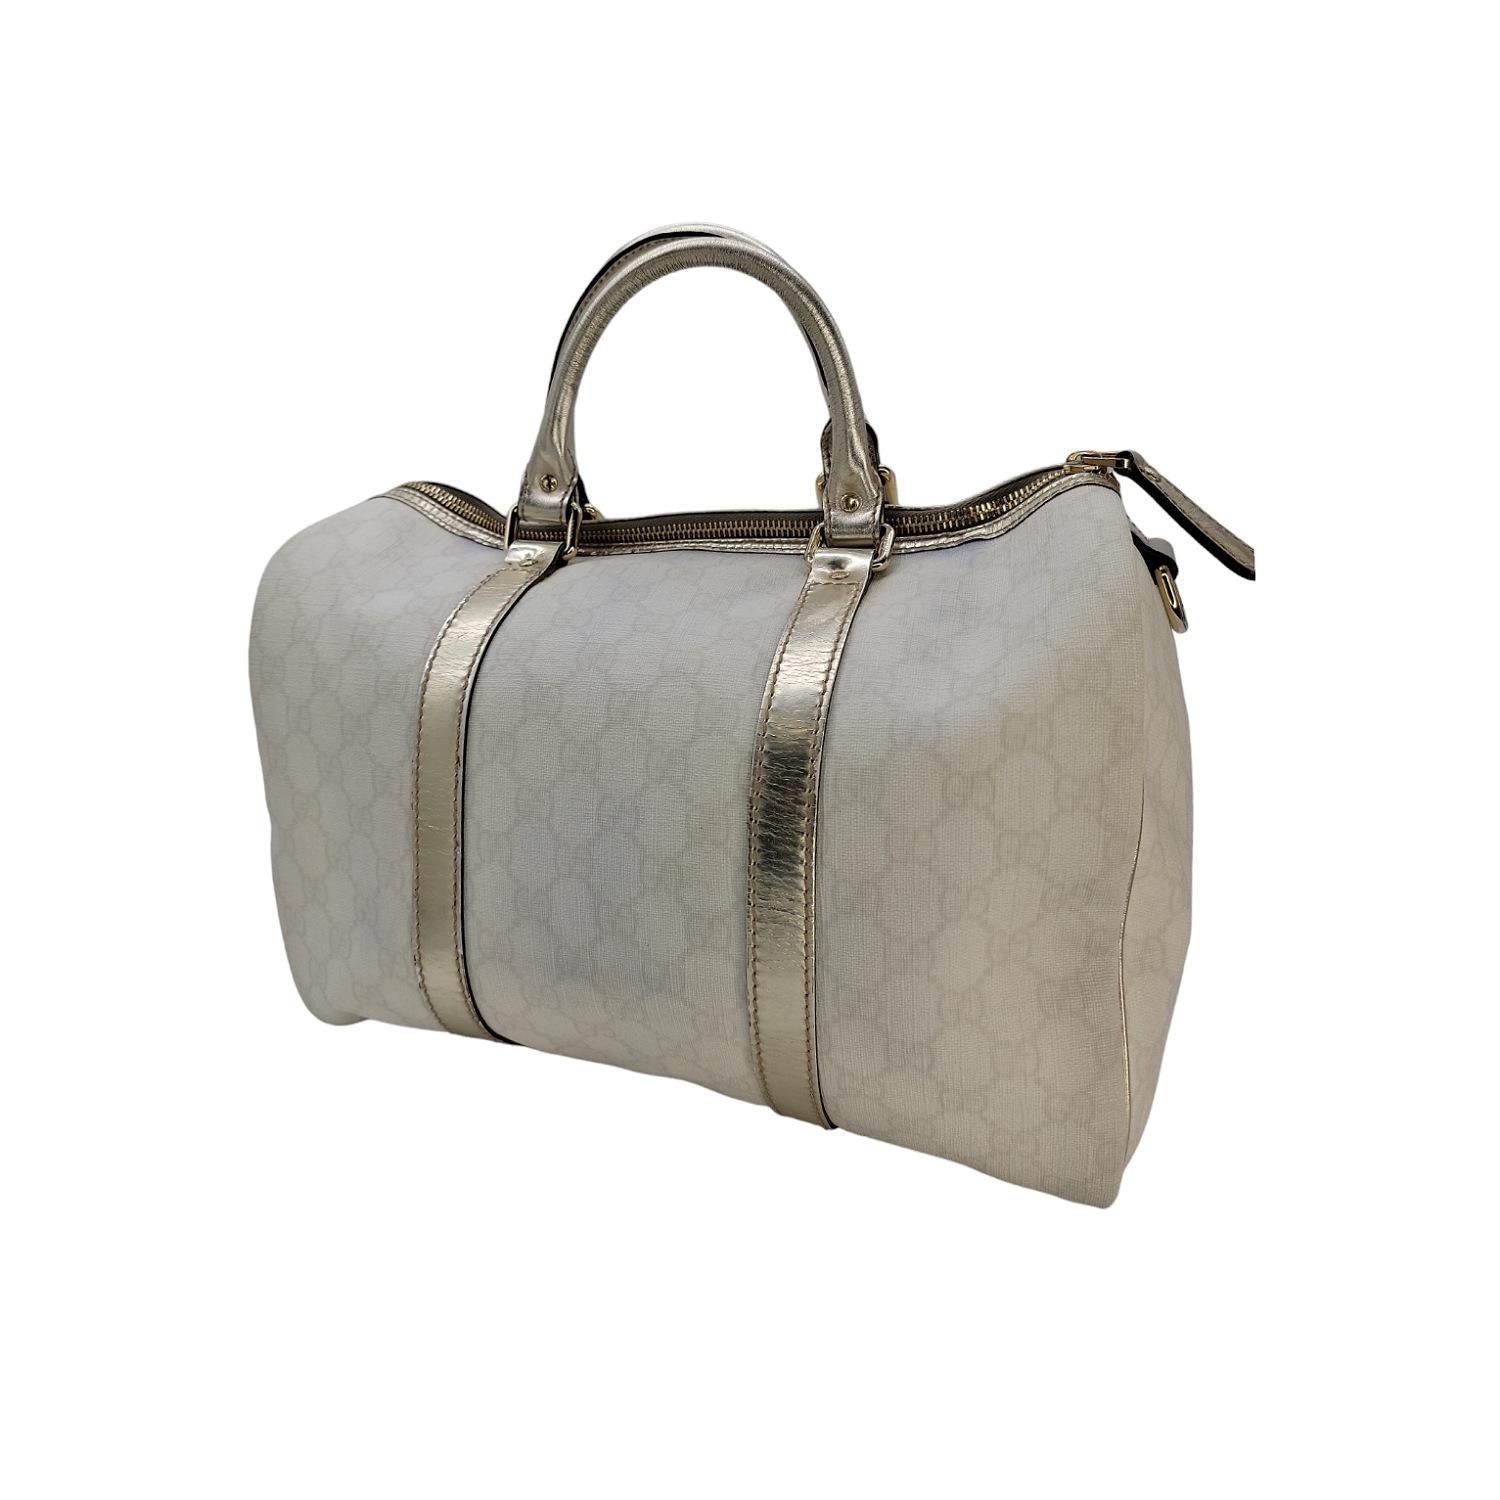 This chic medium Boston style tote is crafted of Gucci GG monogram canvas. The bag features gold metallic leather top handles with polished light gold hardware. The top zipper opens to a spacious black fabric interior with a patch pocket. This